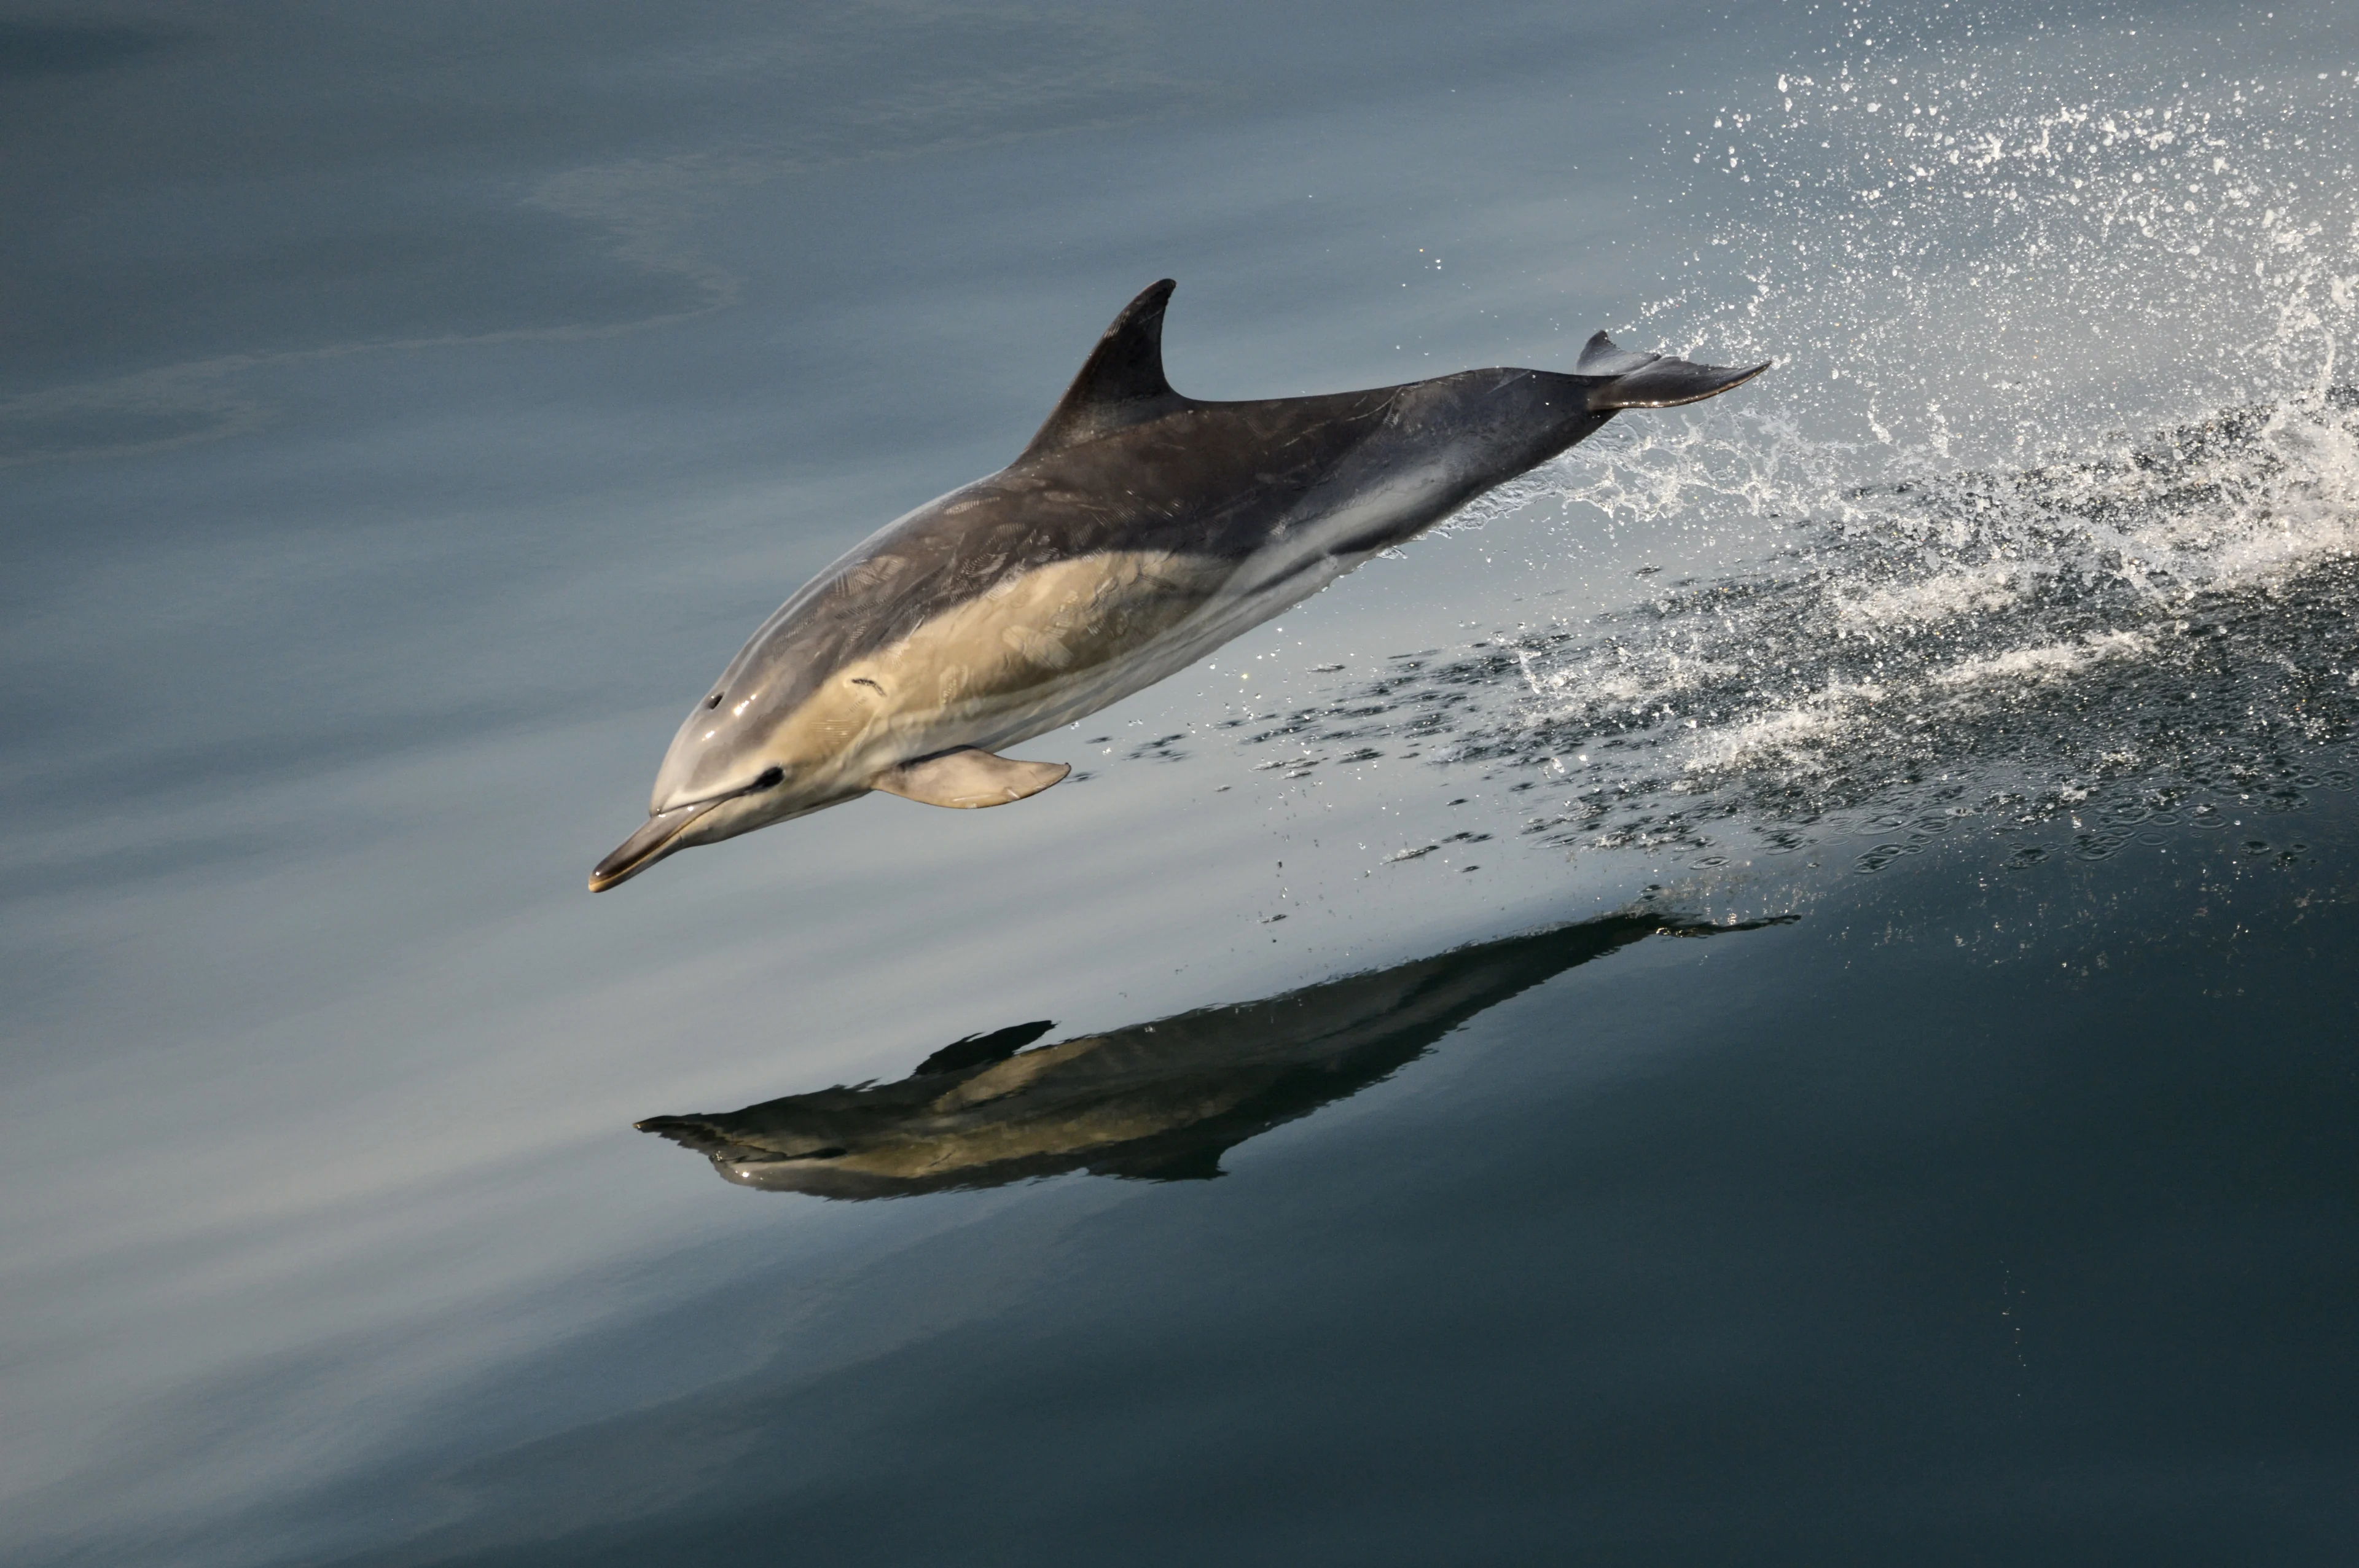 A dolphin breaches alongside the CalMac ferry from Oban to Coll in Argyll & Bute, Scotland. Taken by Megan Barker